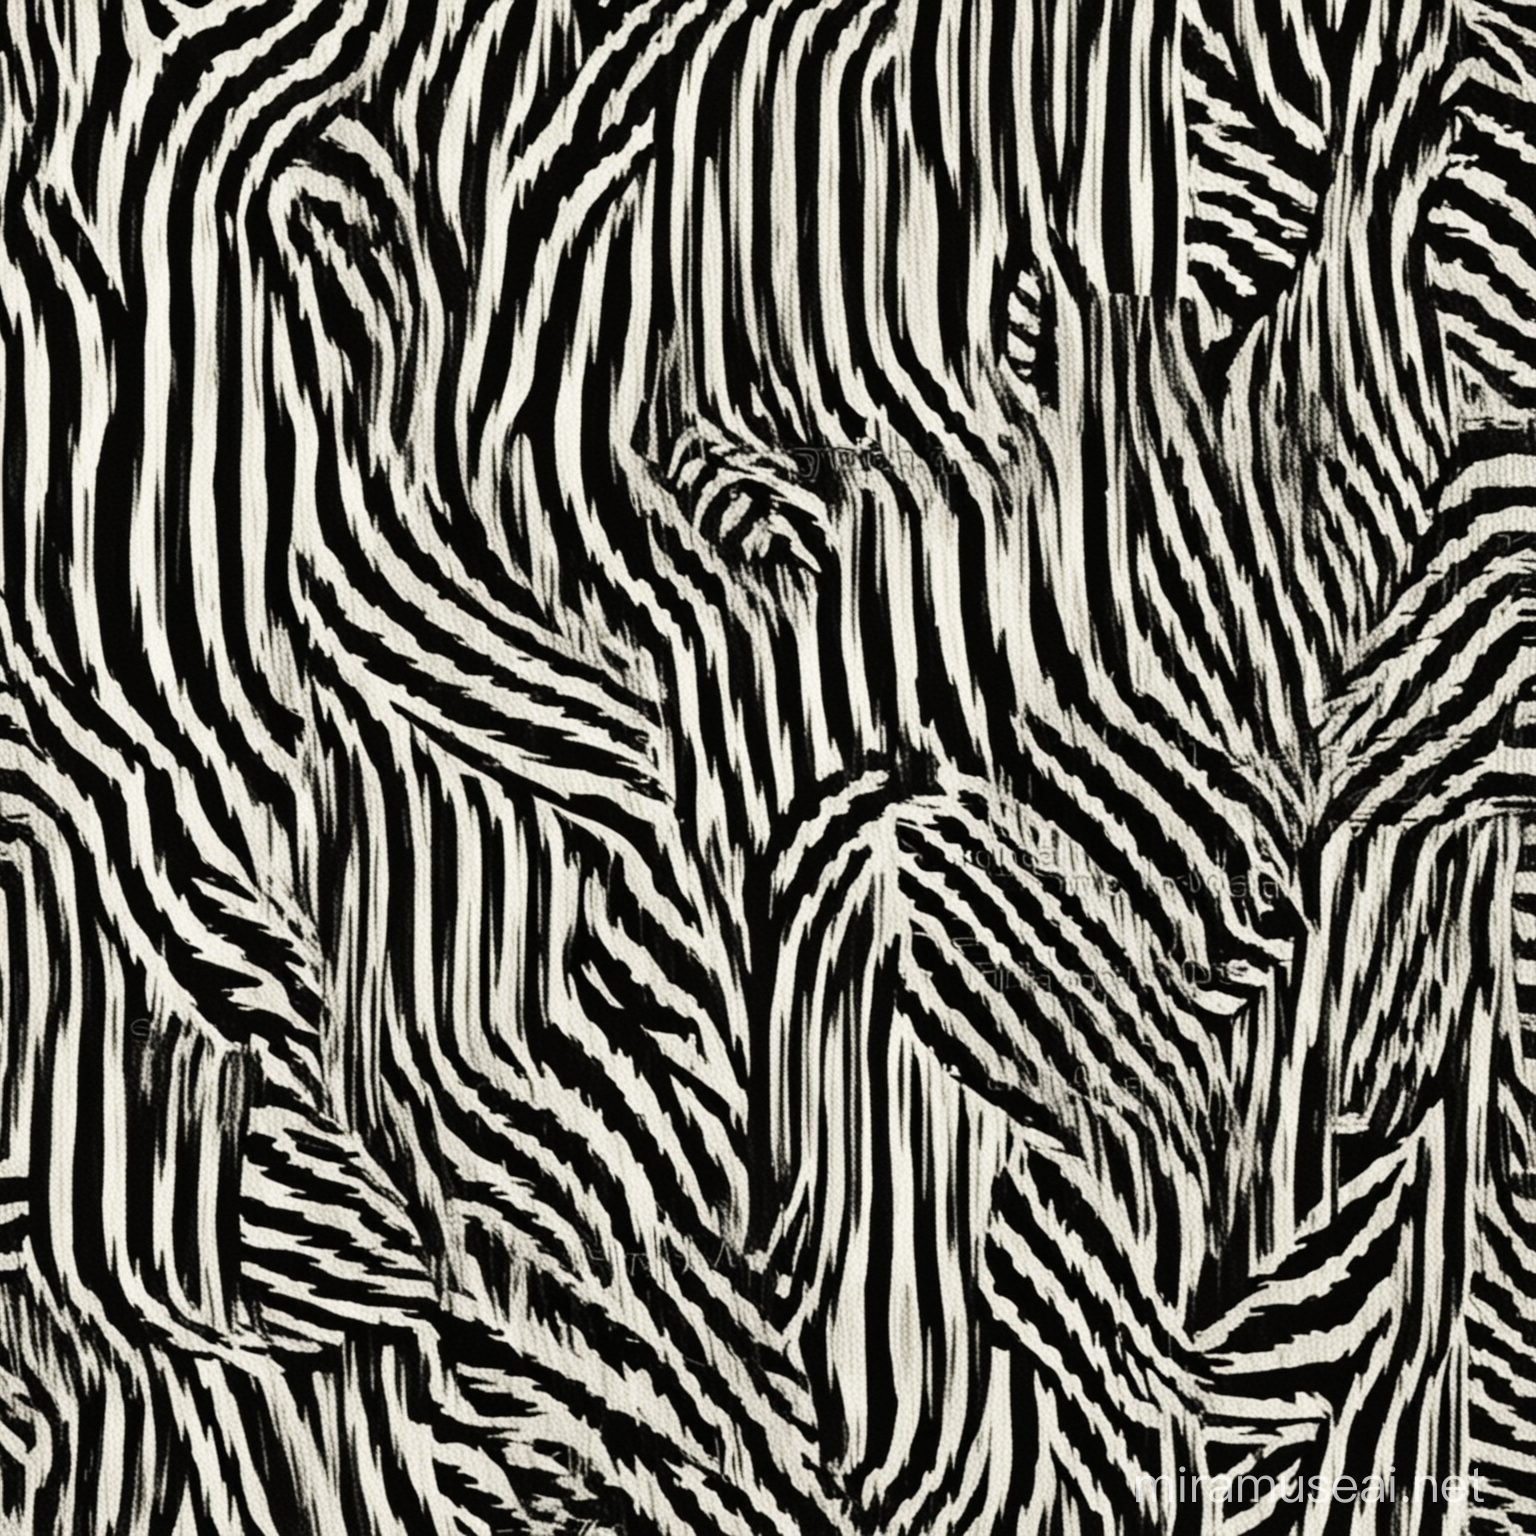 Create black and white African print textile designs that look like zebra stripes